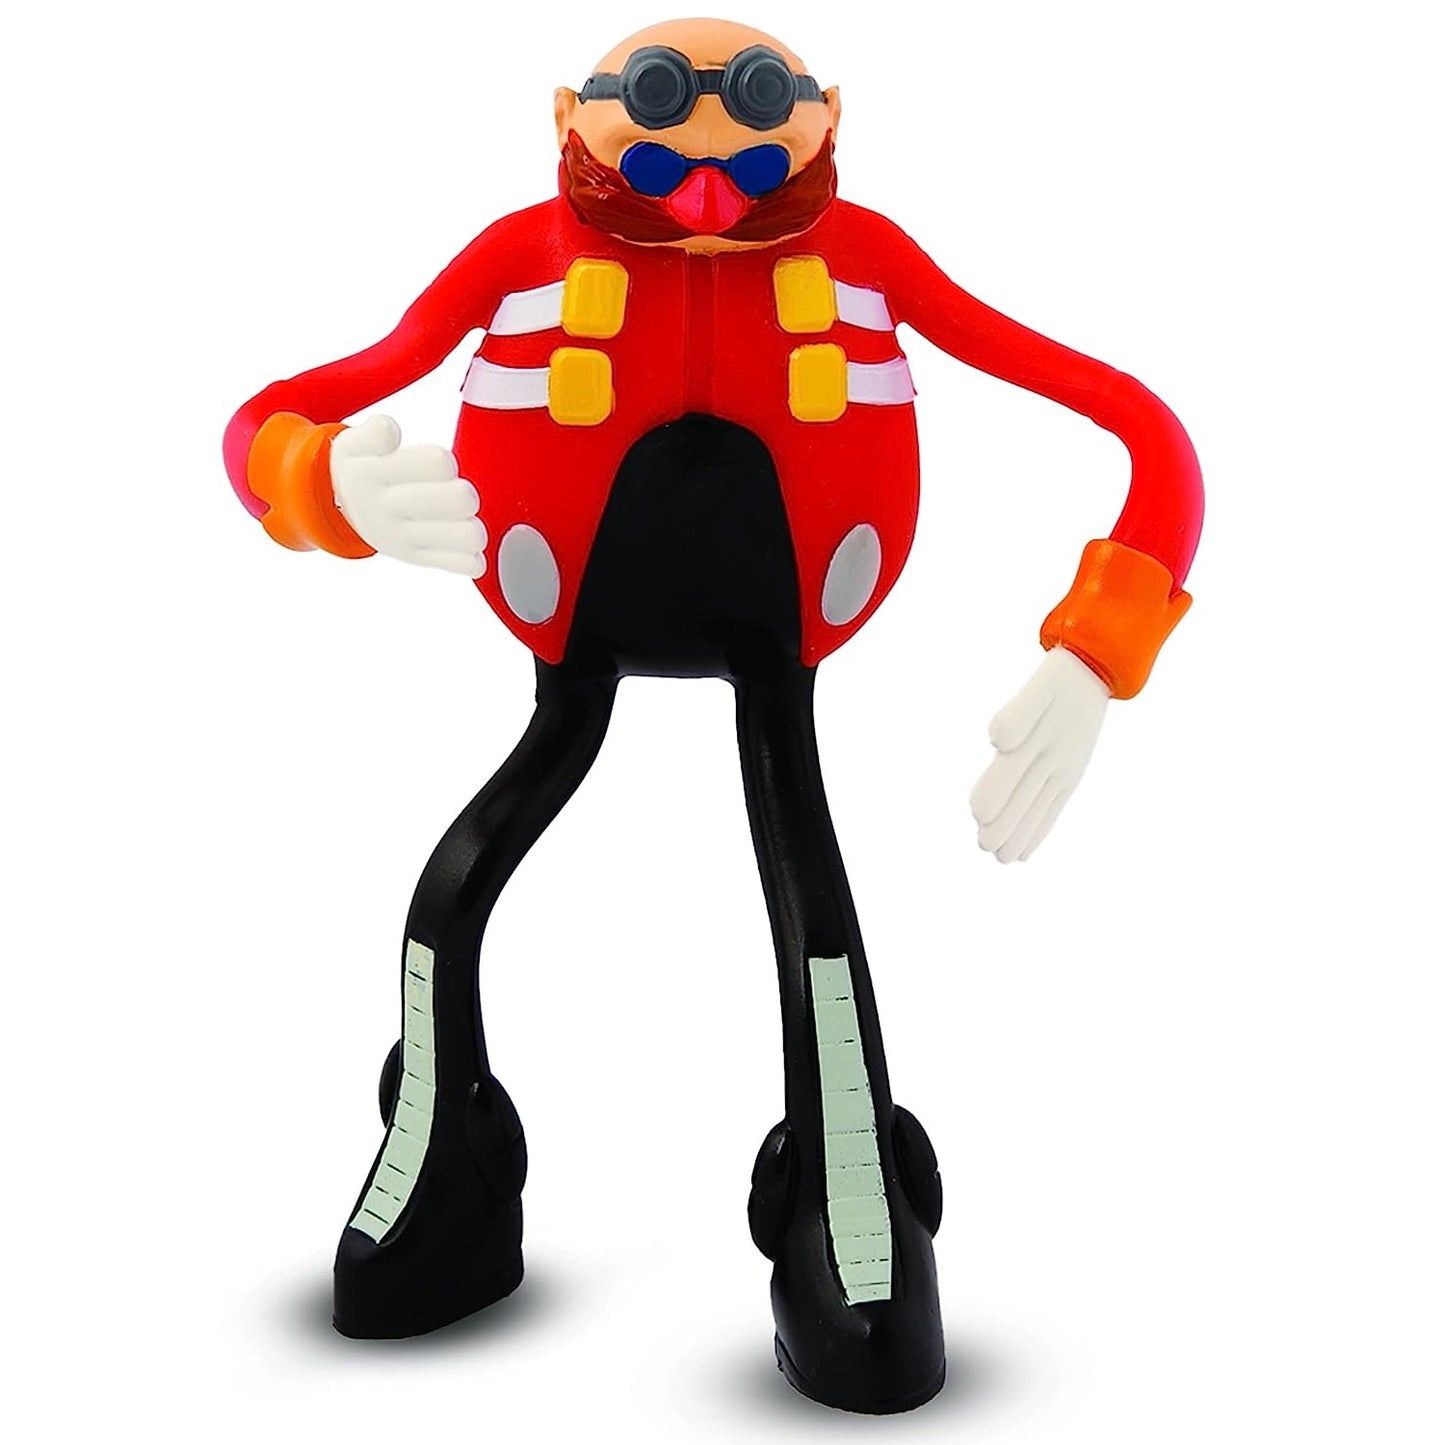 Dr. Eggman from Sonic The Hedeghog bendable figure